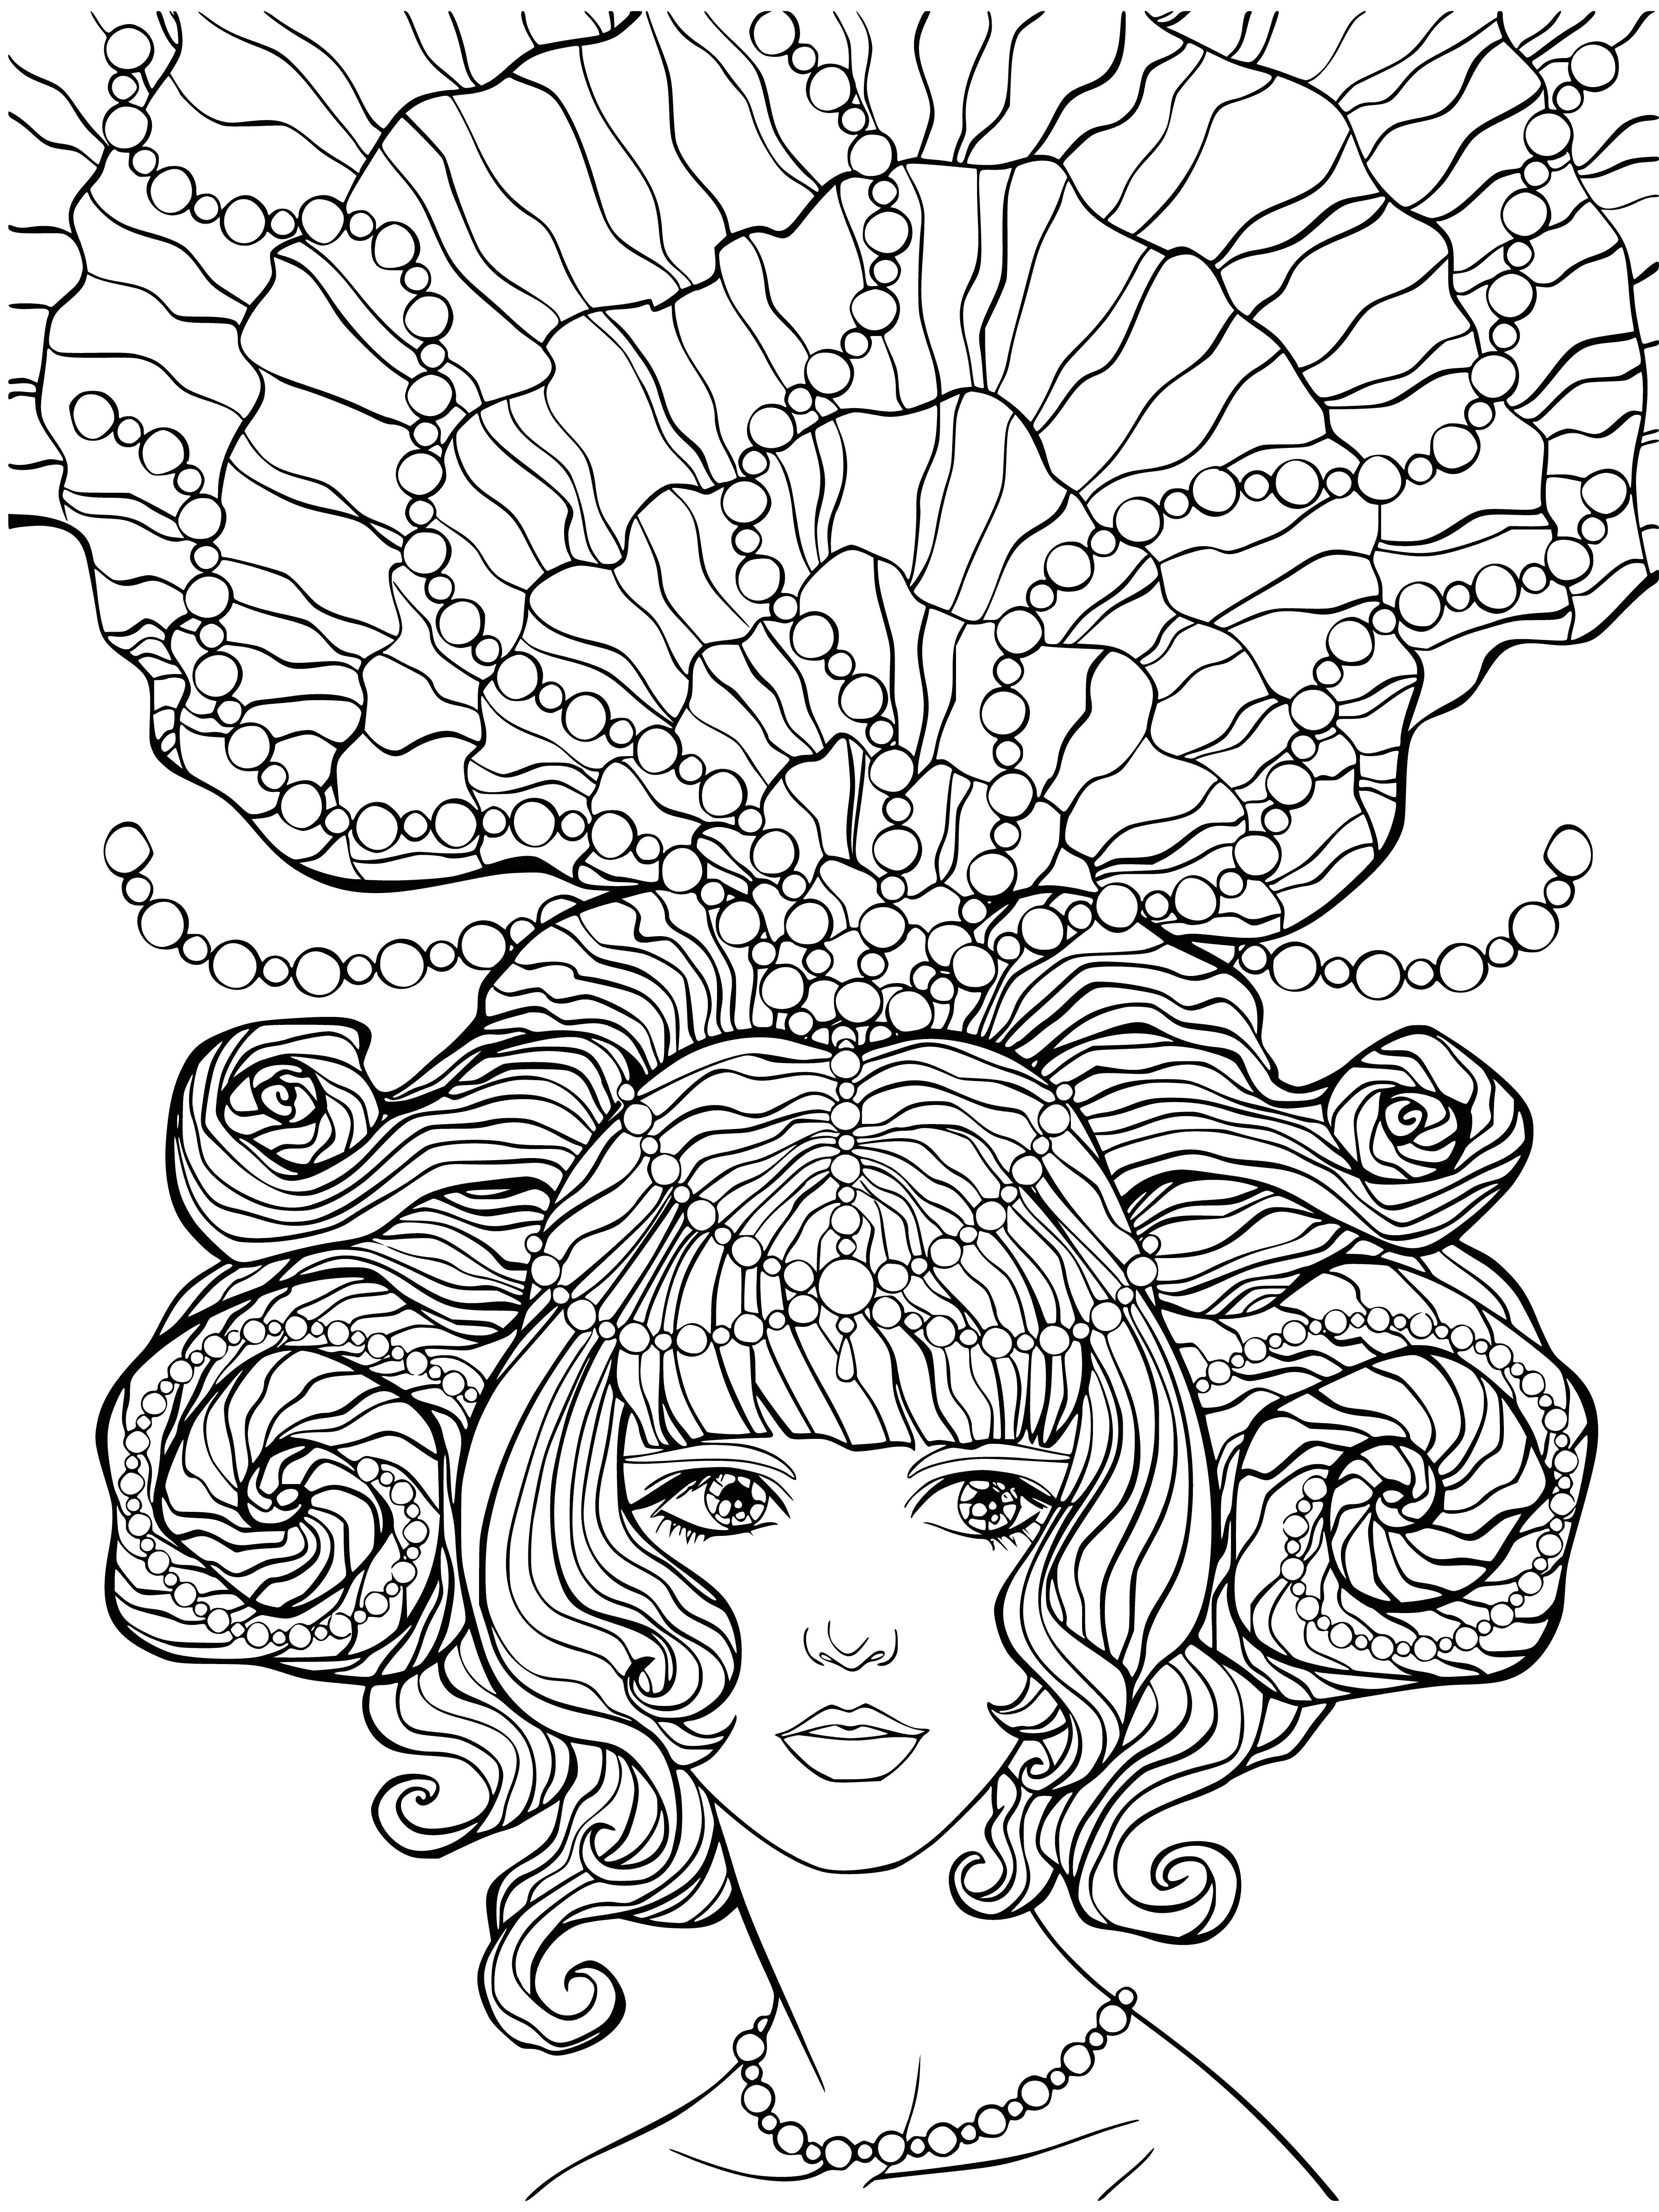 coloring page: Girl stands as a sea princess amidst crashing waves & blue sky with white clouds. Crown on head & flowing dress. Magical scene!